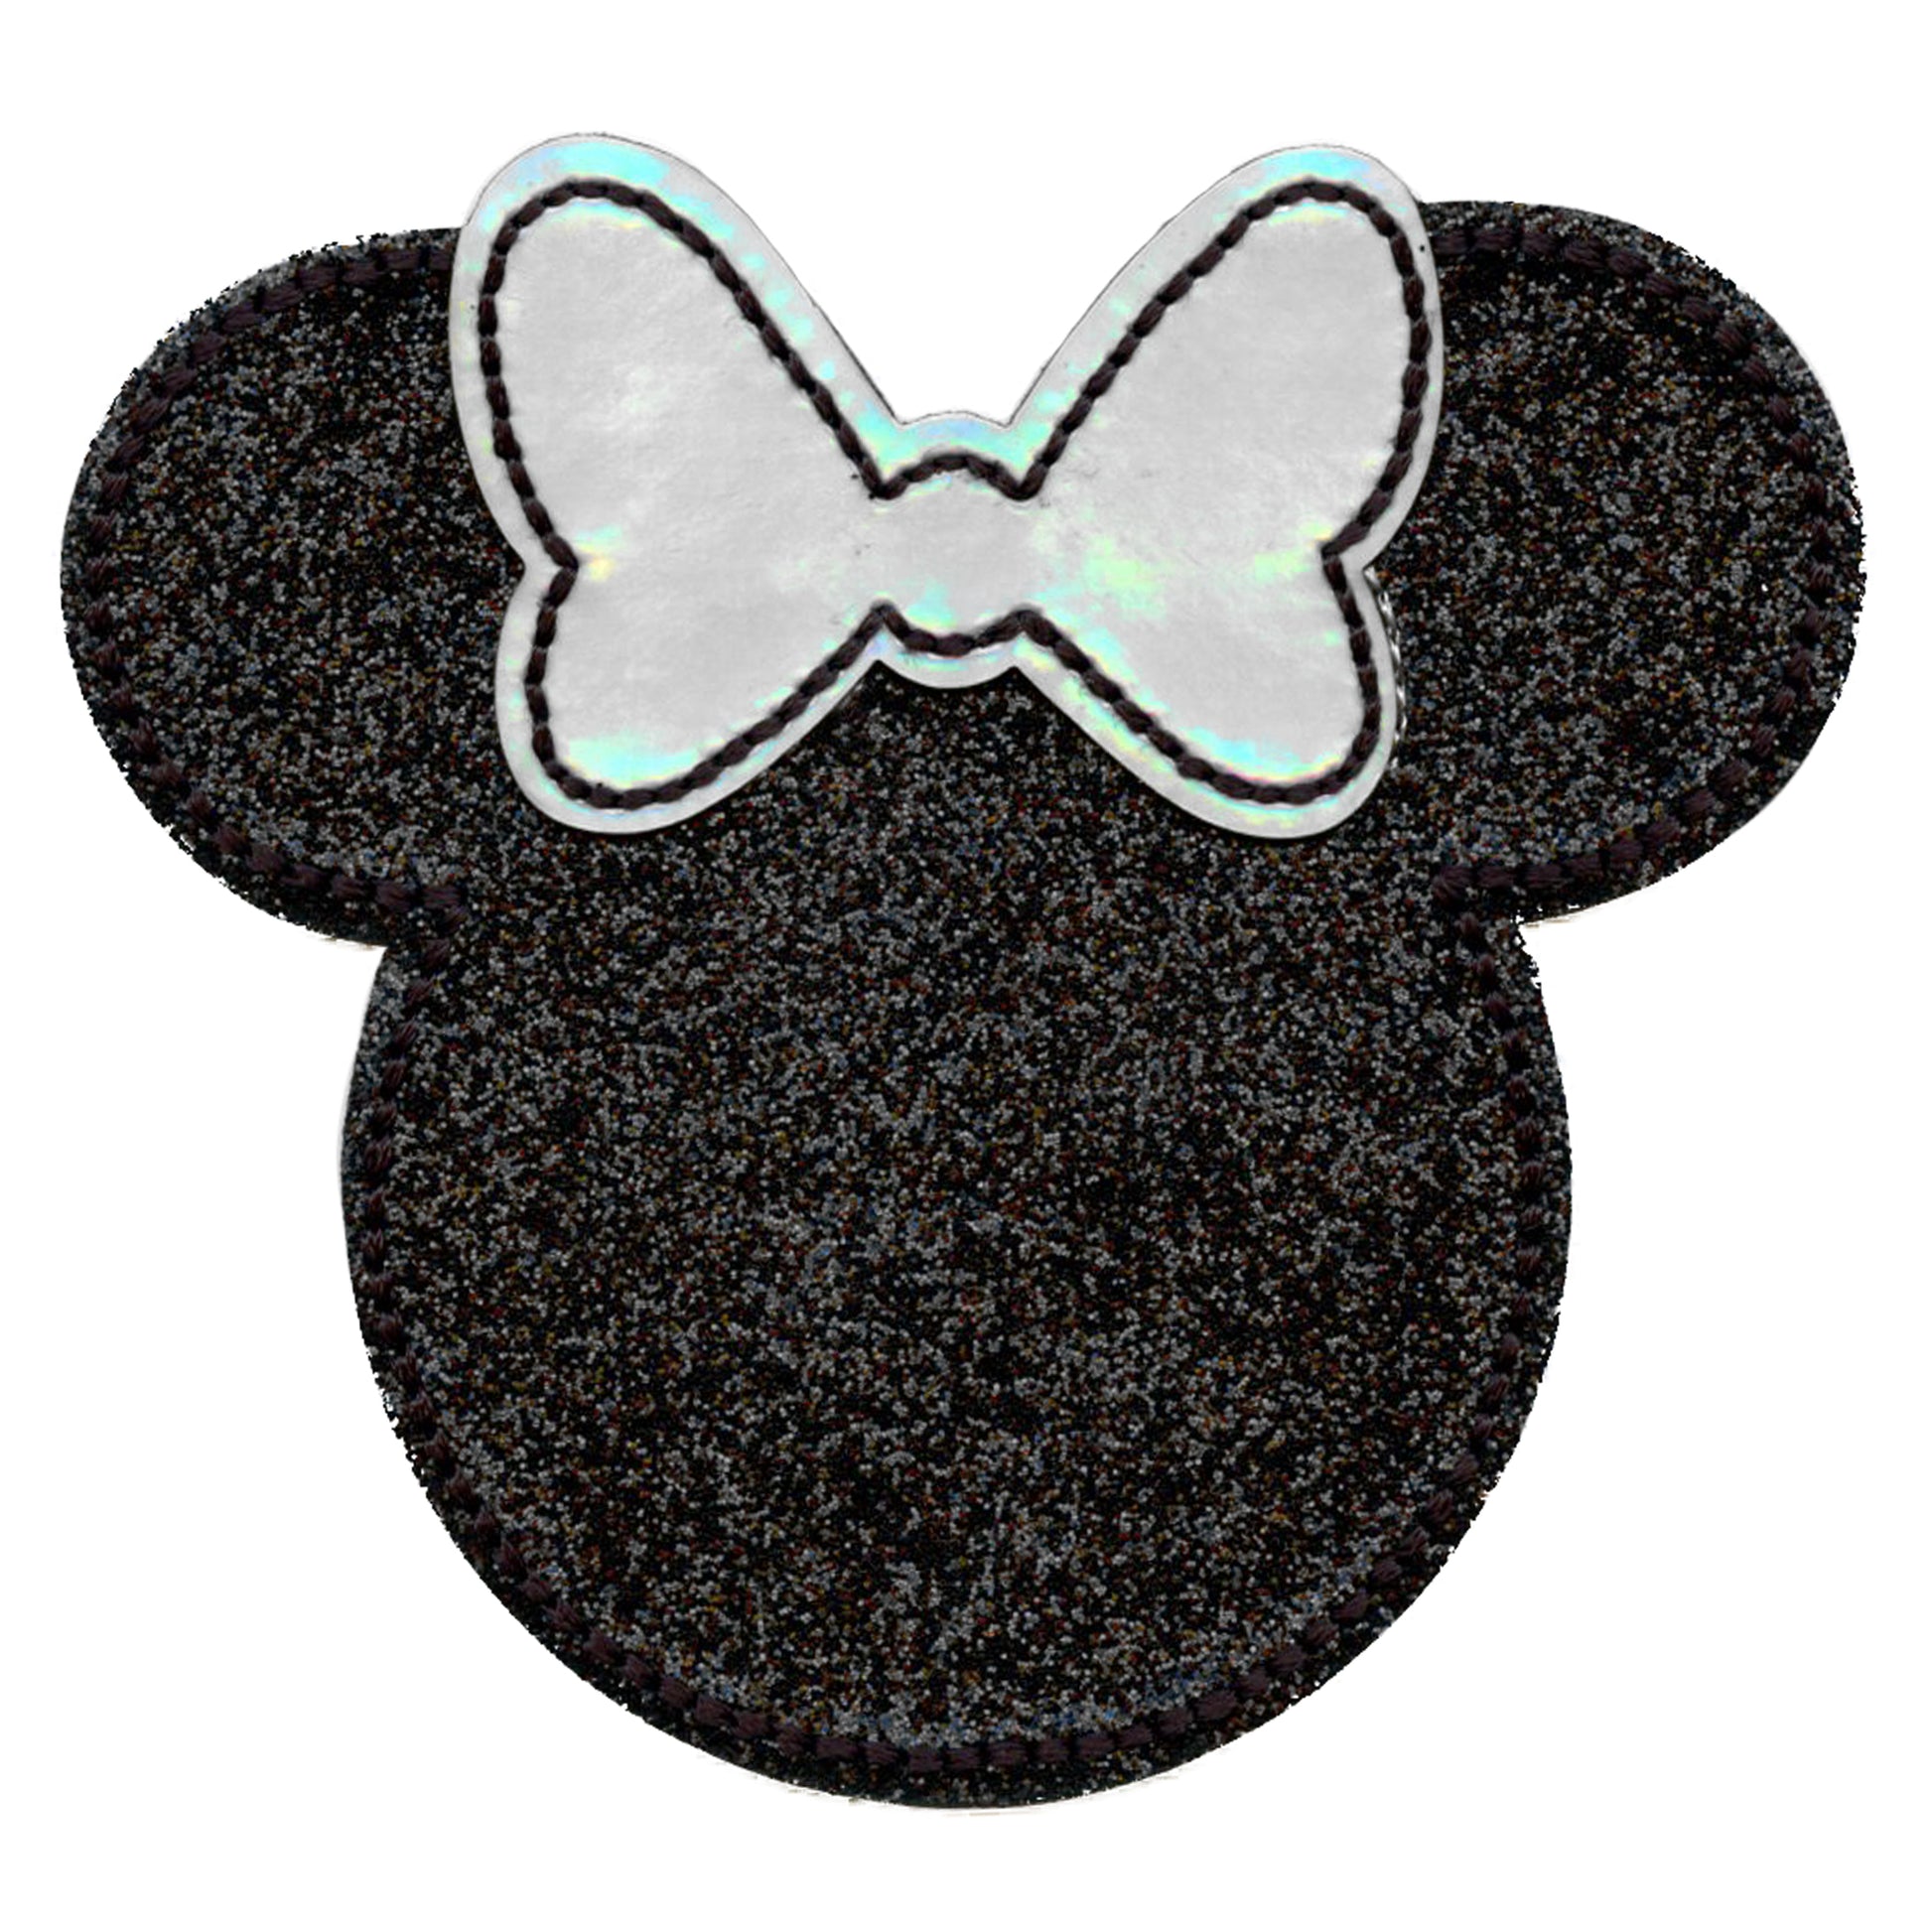 Minnie Mouse Appliques Clothing  Mickey Mouse Patches Sewing